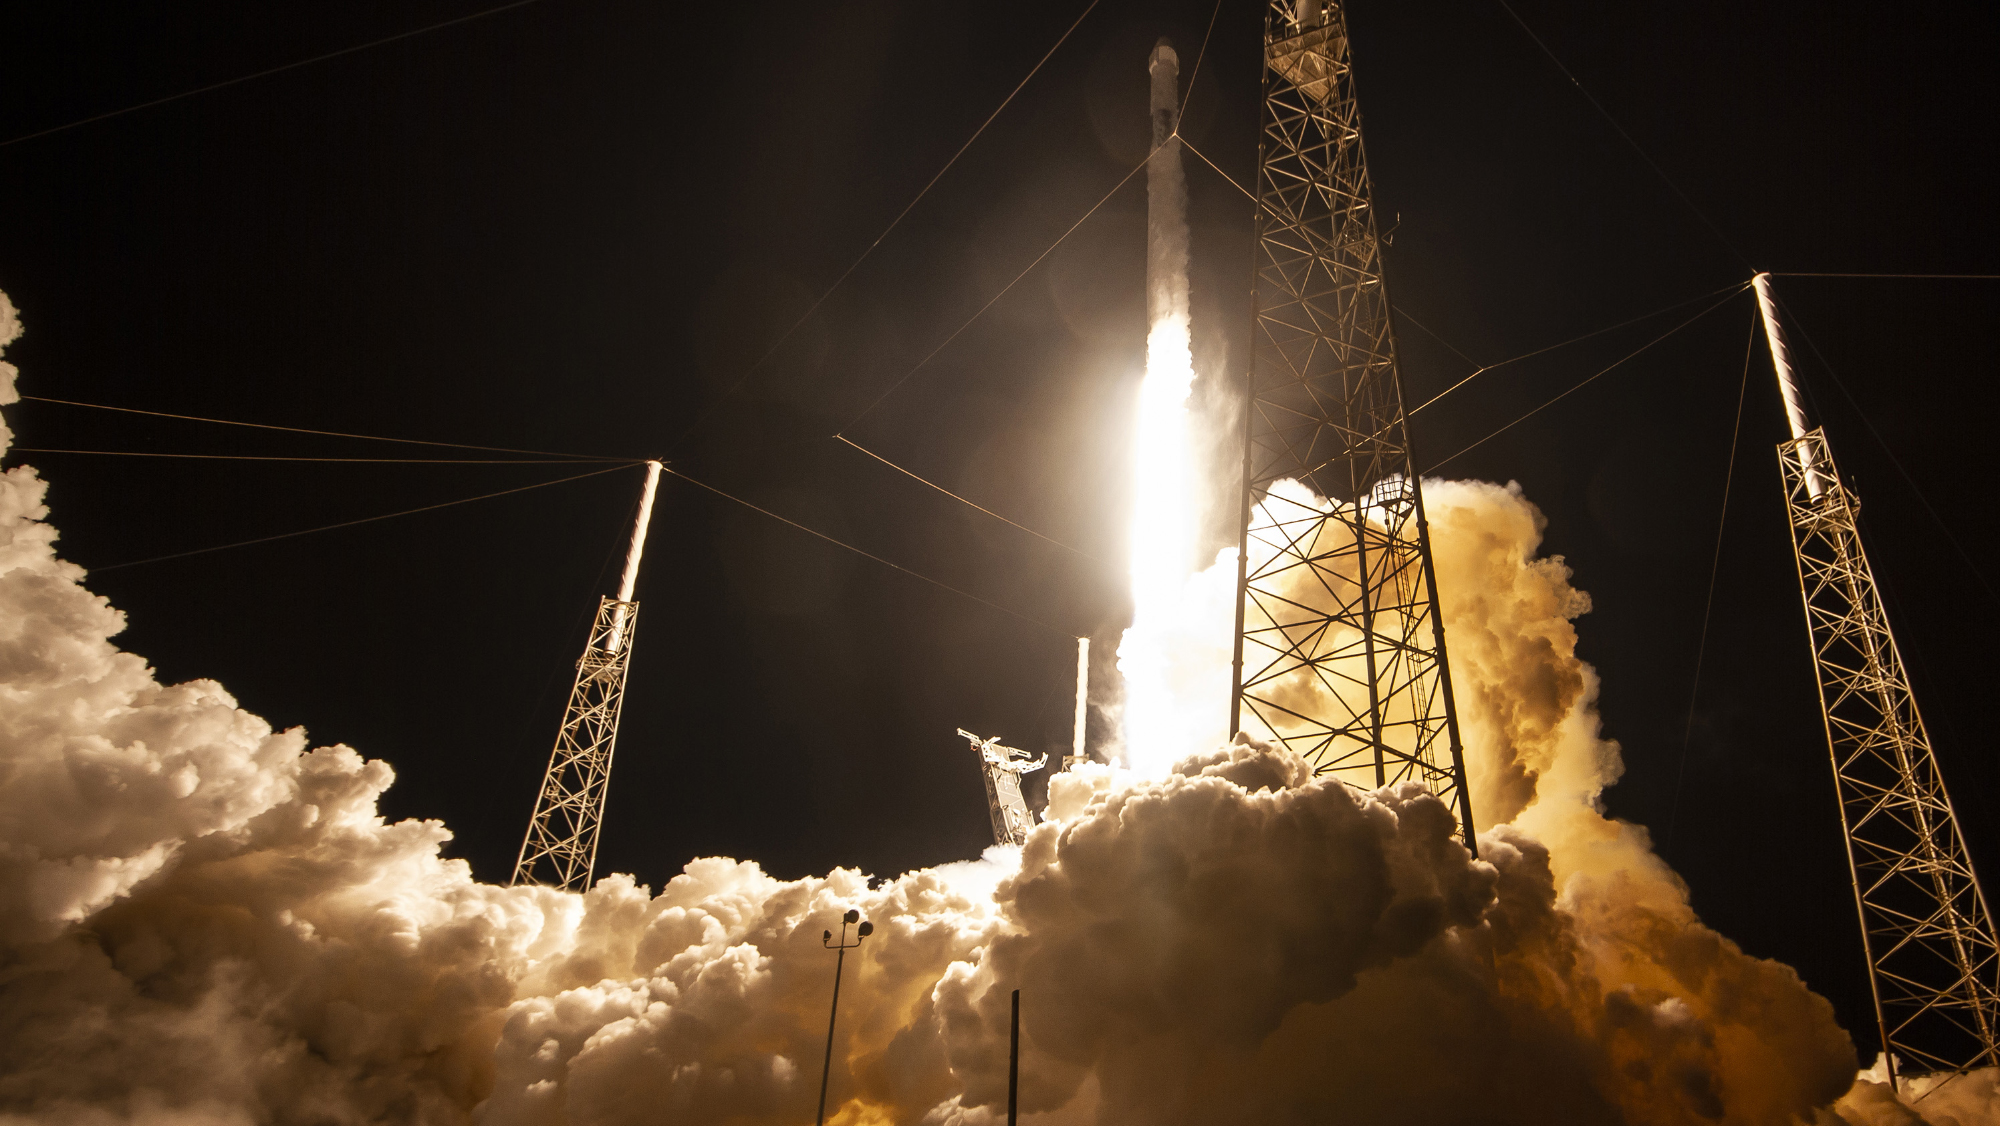 SpacEx Falcon 9 rocket launches from the Cape Canaveral Air Force Station in Florida.